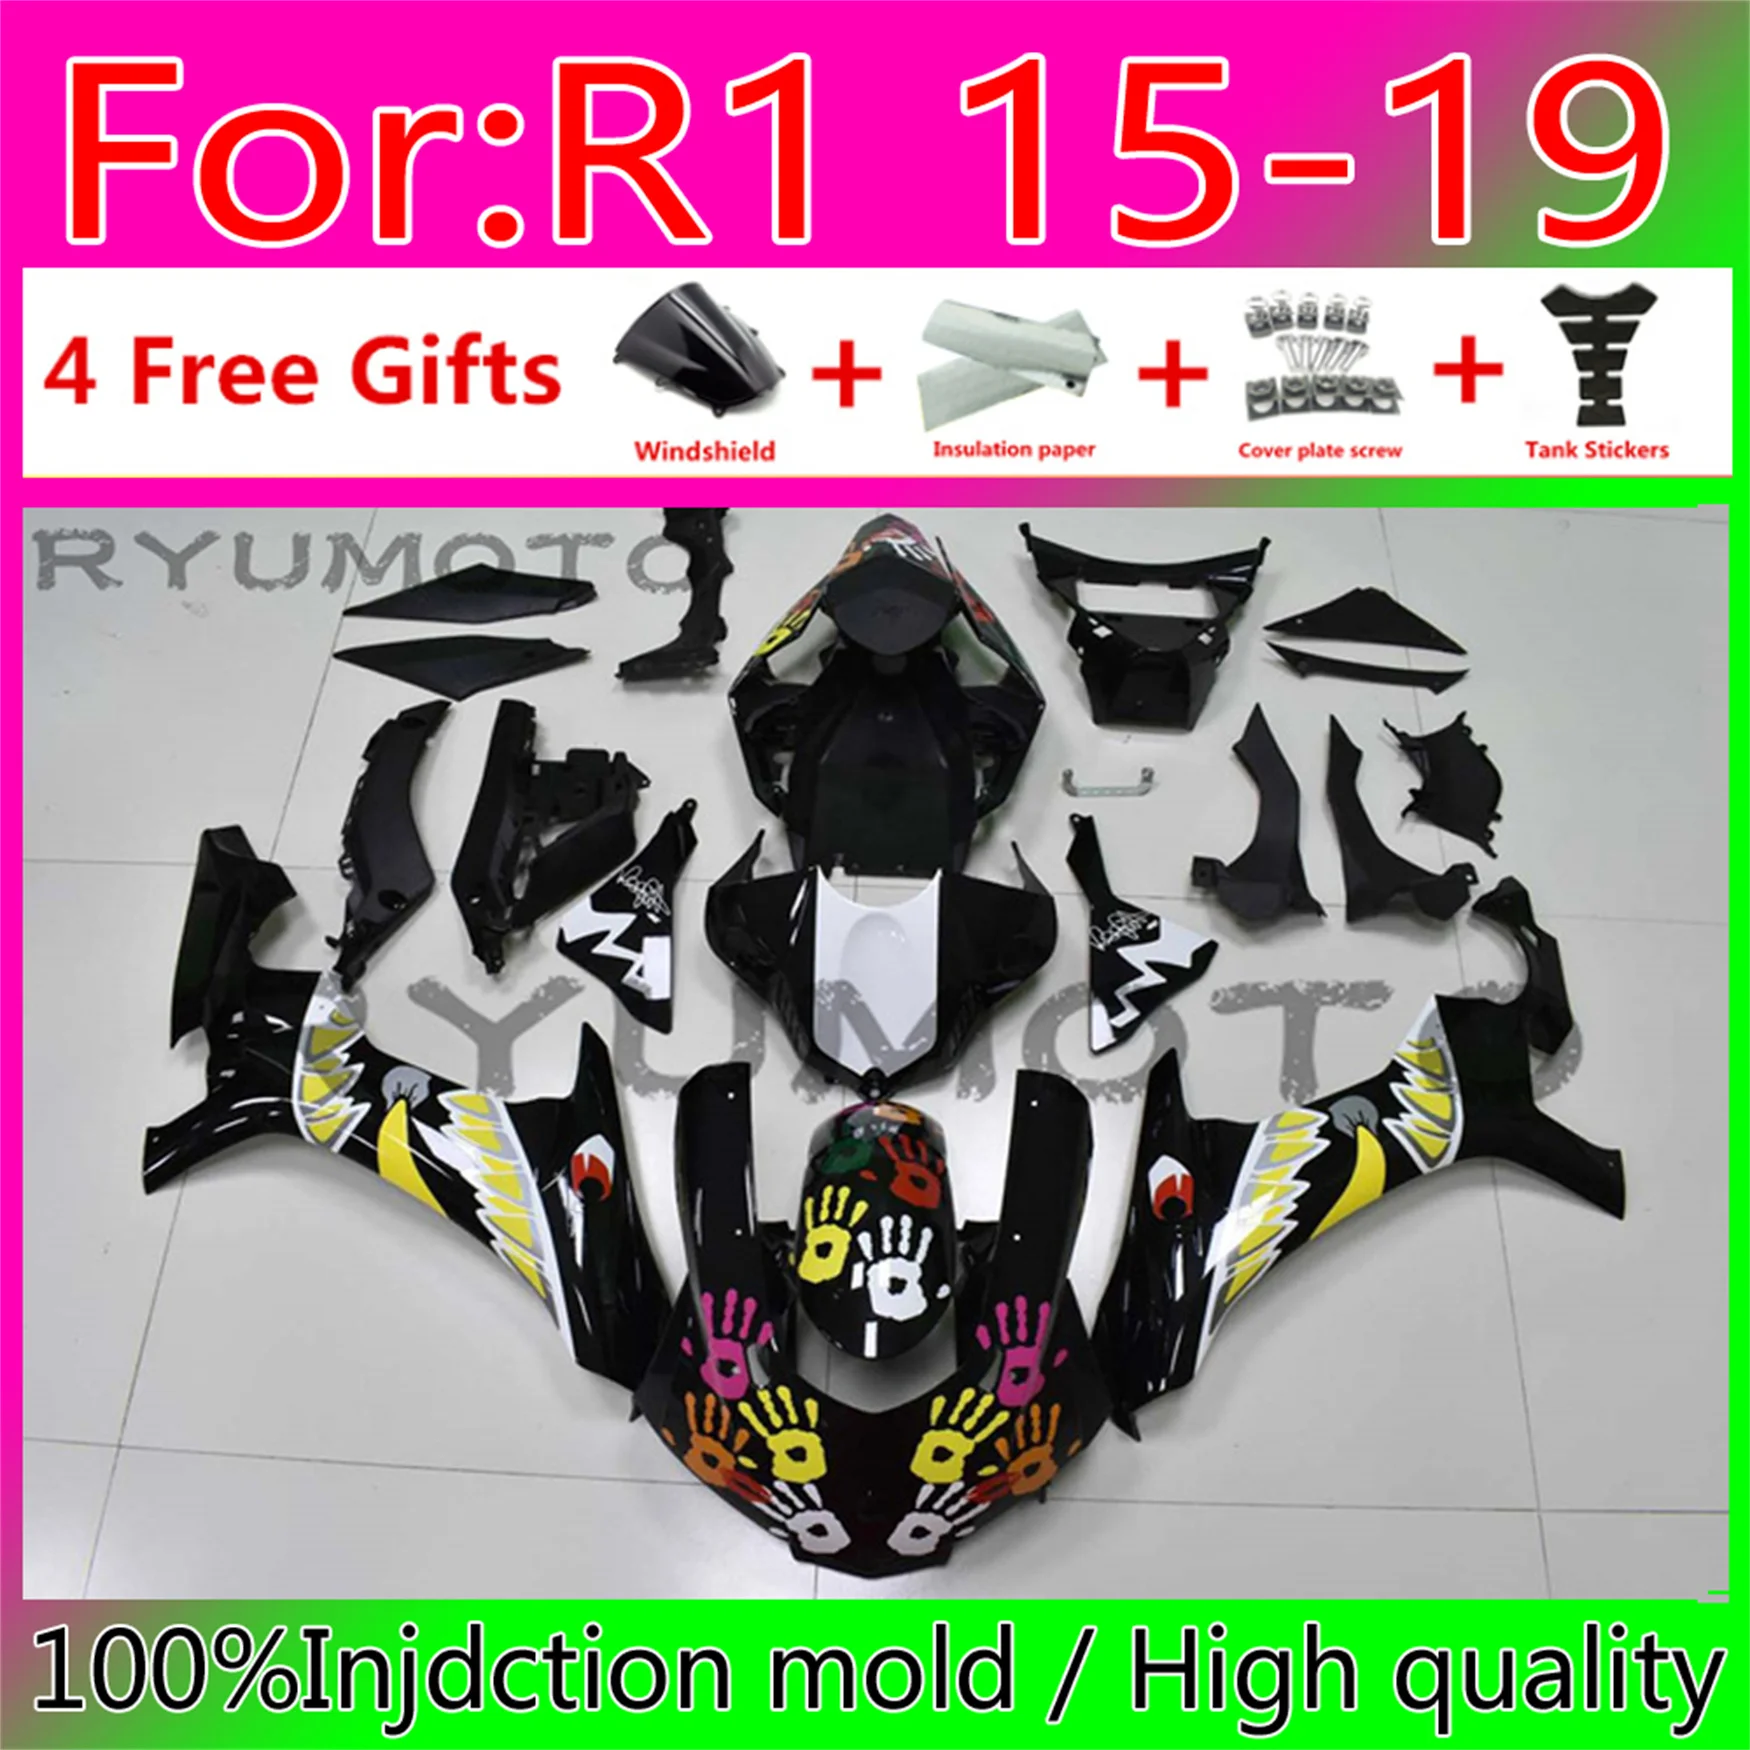 

New ABS whole Fairing kit 100% fitment for YAMAHA YZFR1 2015 2016 2017 2018 2019 YZF R1 15 16 17 18 19 YZF1000 Fairings colorful